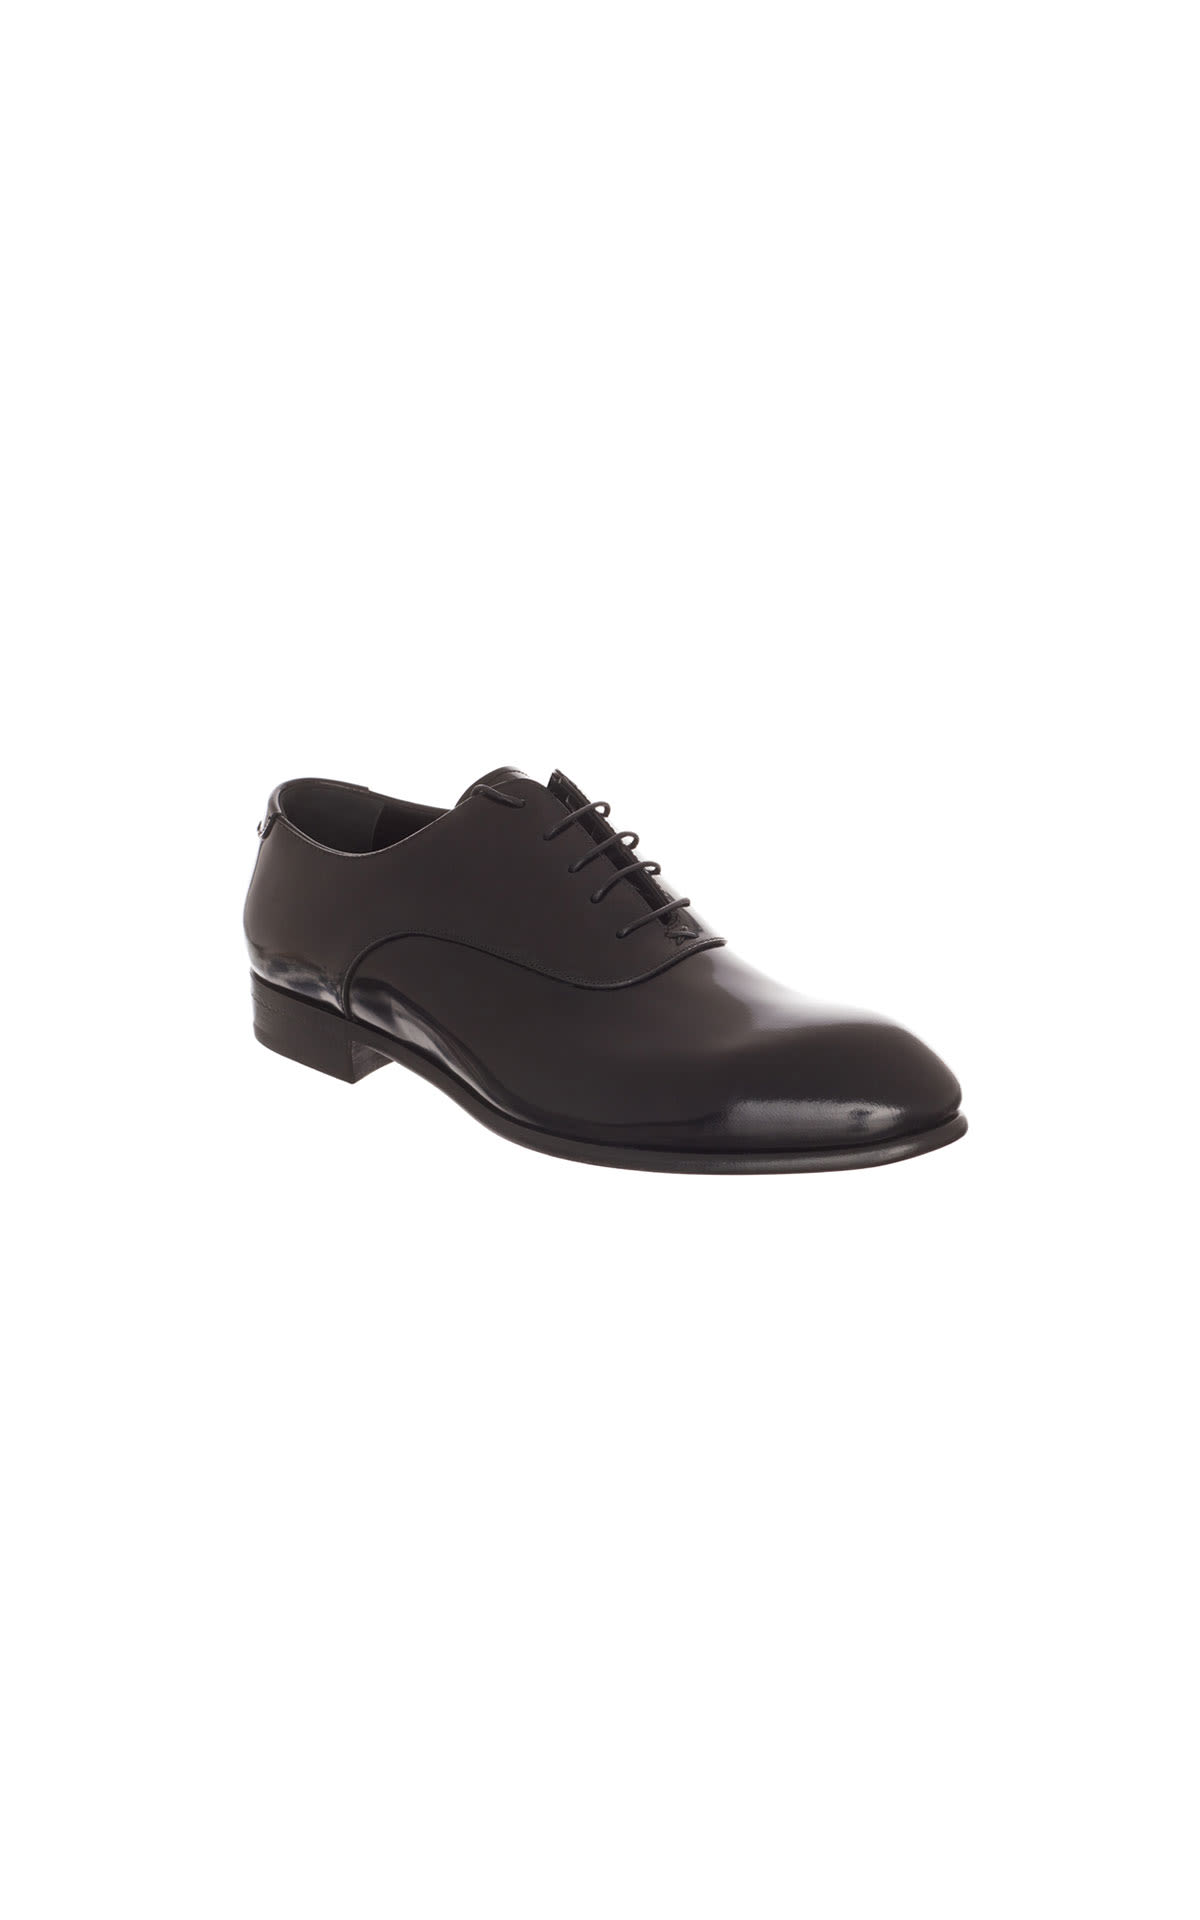 Zegna Oxford lace up from Bicester Village